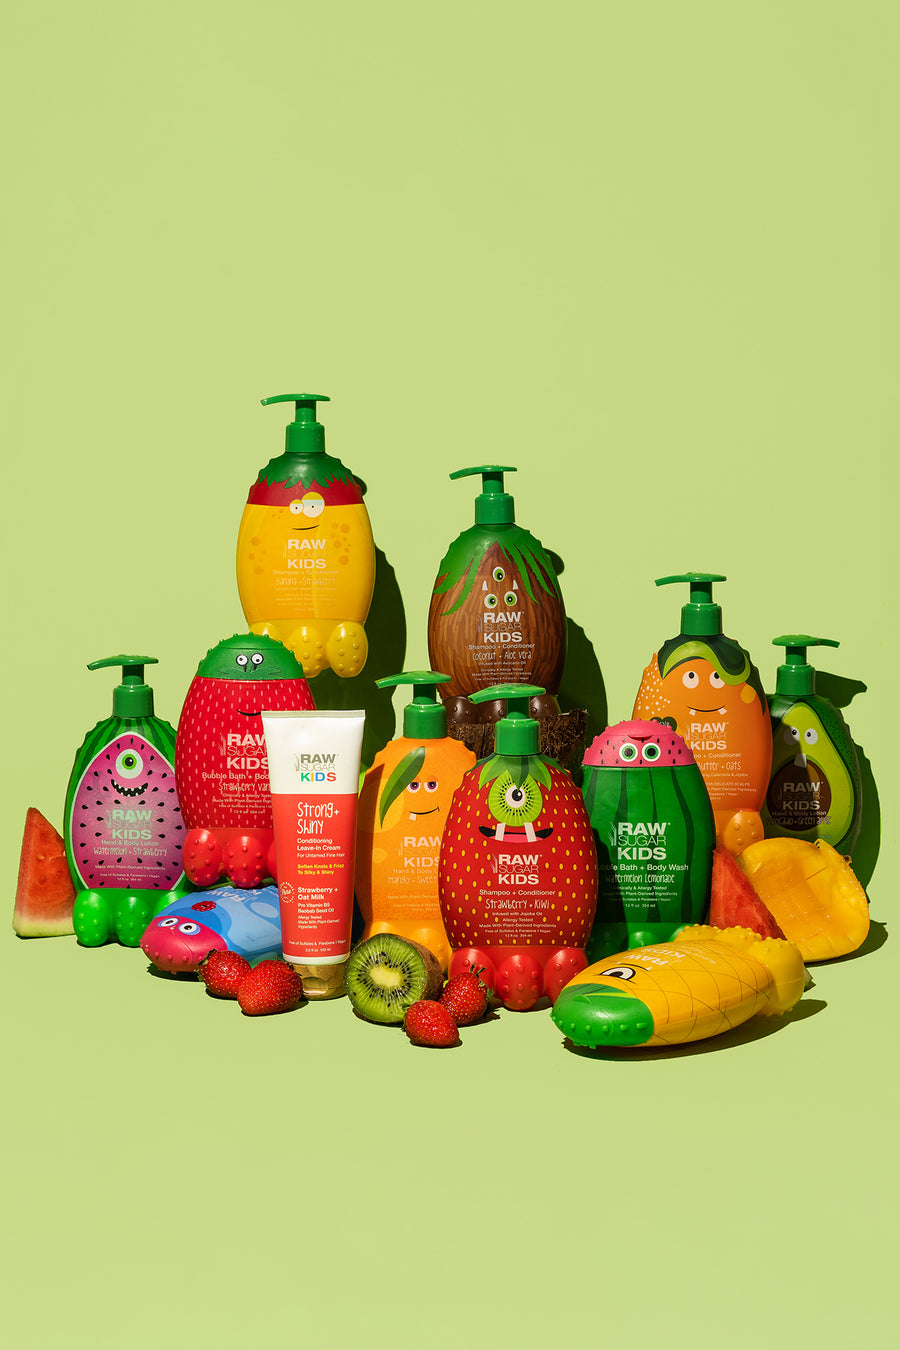 Raw Sugar Kids products grouped together with fresh strawberries, kiwi, mango and watermelon